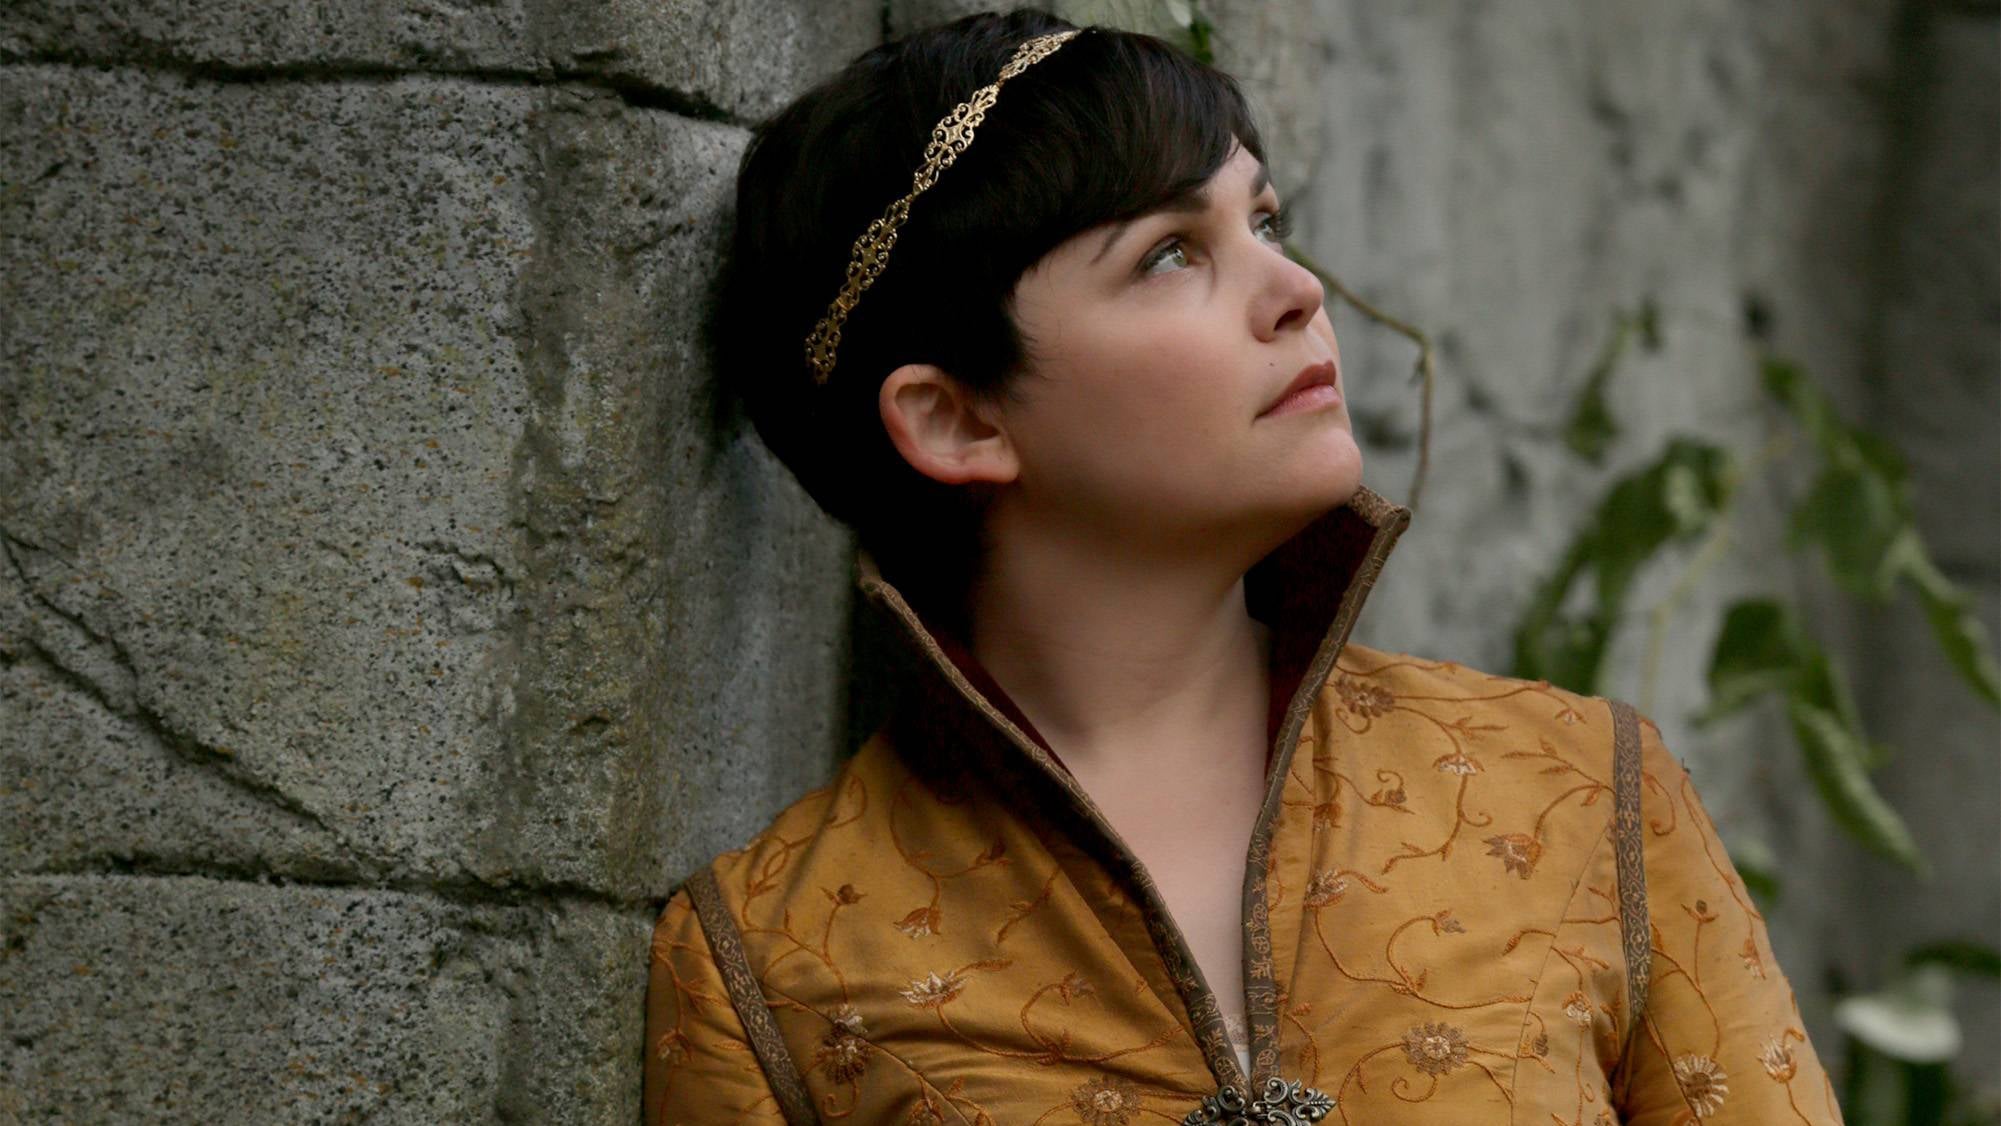 Once Upon a Time saison 5 episode 7 streaming vf - 𝐏𝐀𝐏𝐘𝐒𝐓𝐑𝐄𝐀𝐌𝐈𝐍𝐆 - Once Upon A Time Saison 5 Streaming